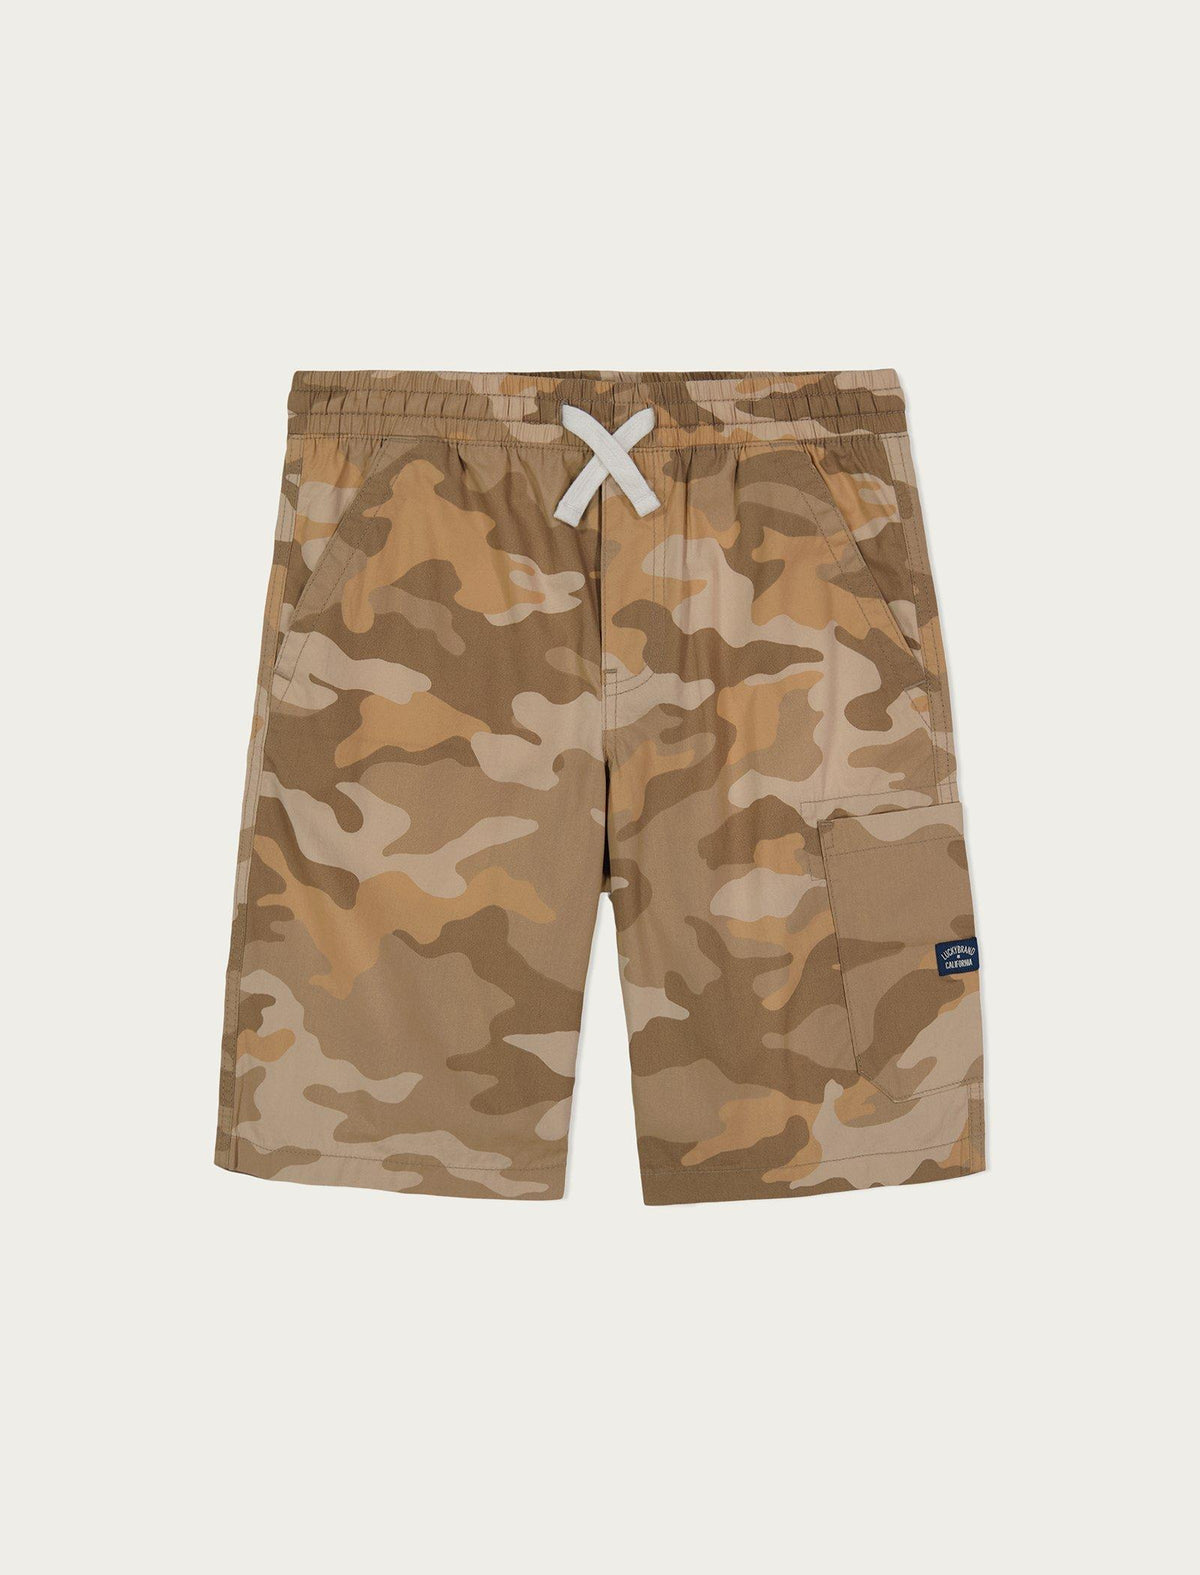 Lucky Brand Boys Camo Pull On Shorts Open White/Natural